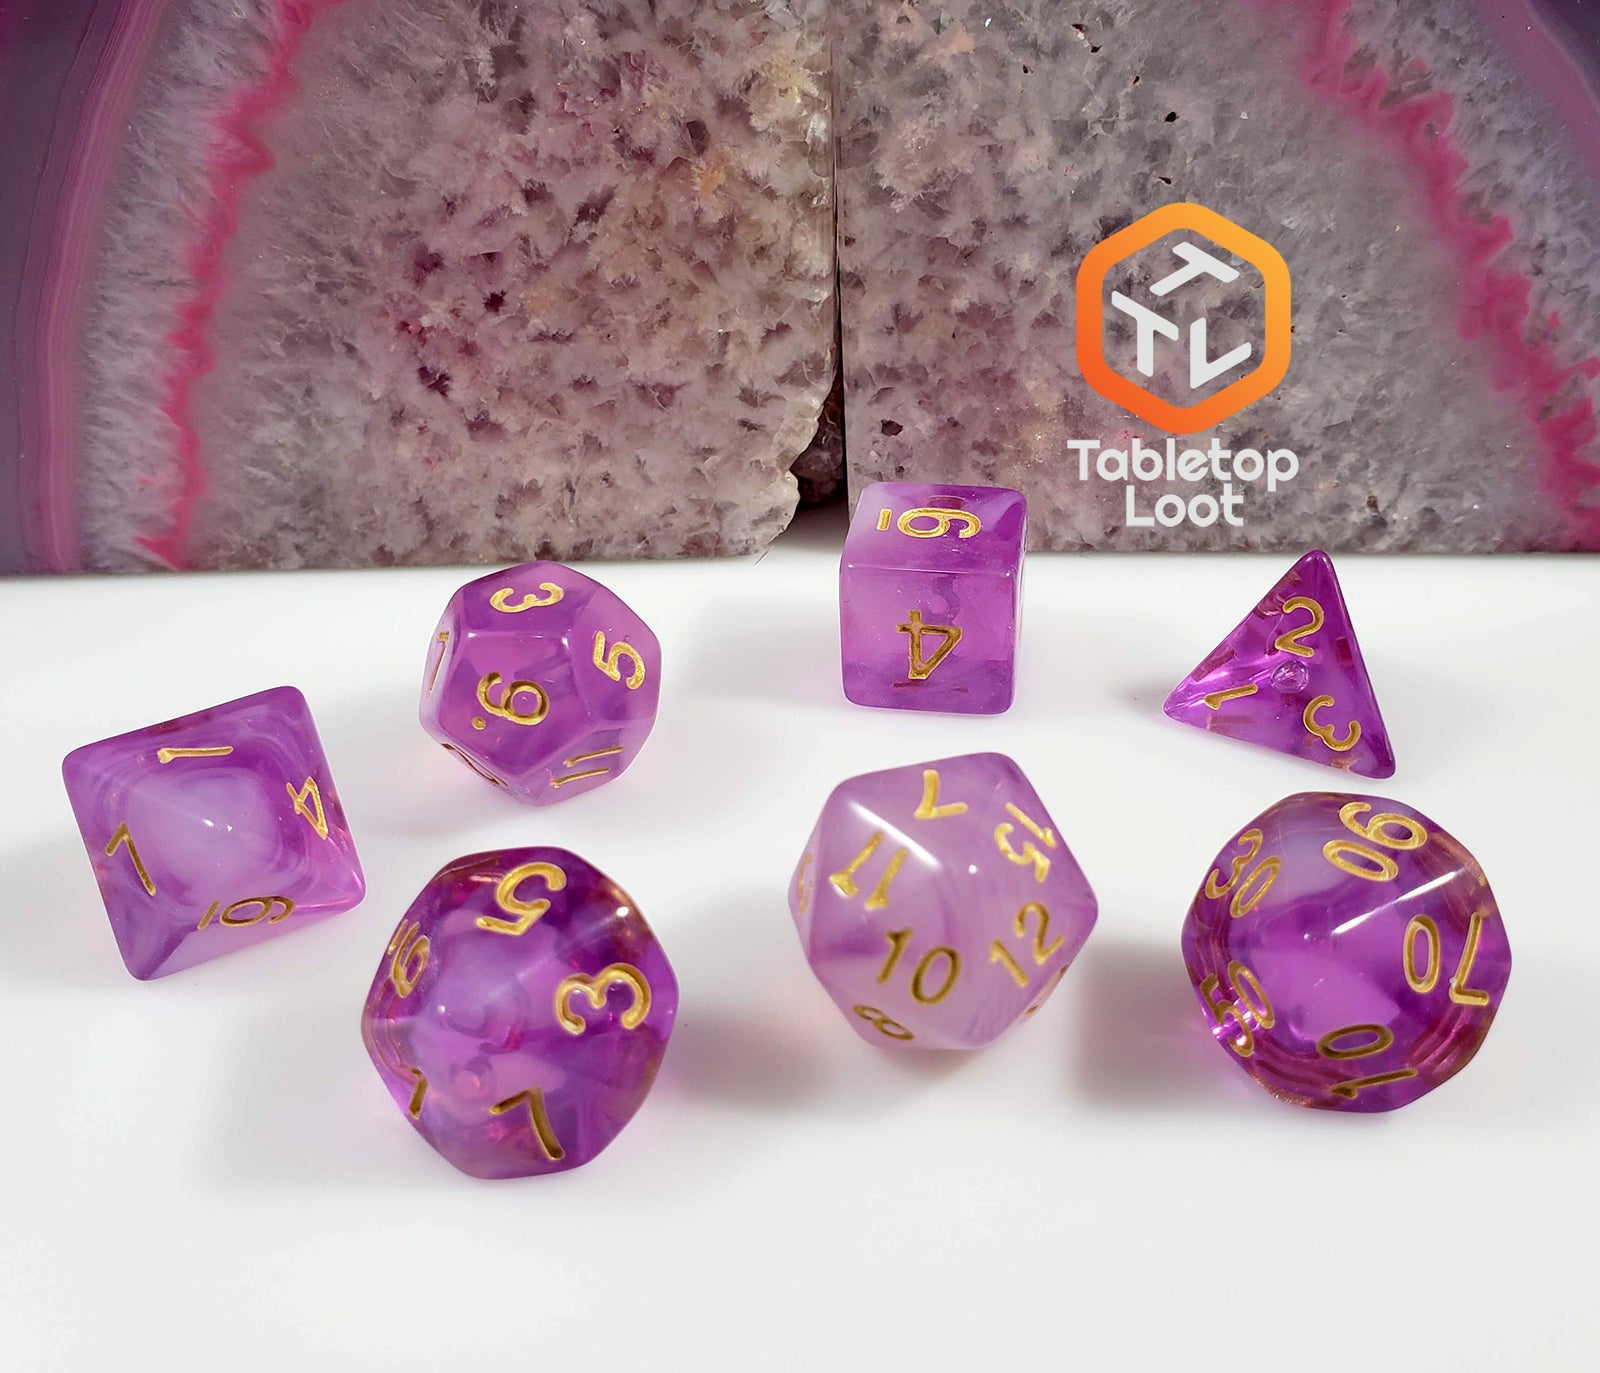 The Amethyst Geode 7 piece dice set from Tabletop Loot with swirls of purple and white resin and gold numbering.